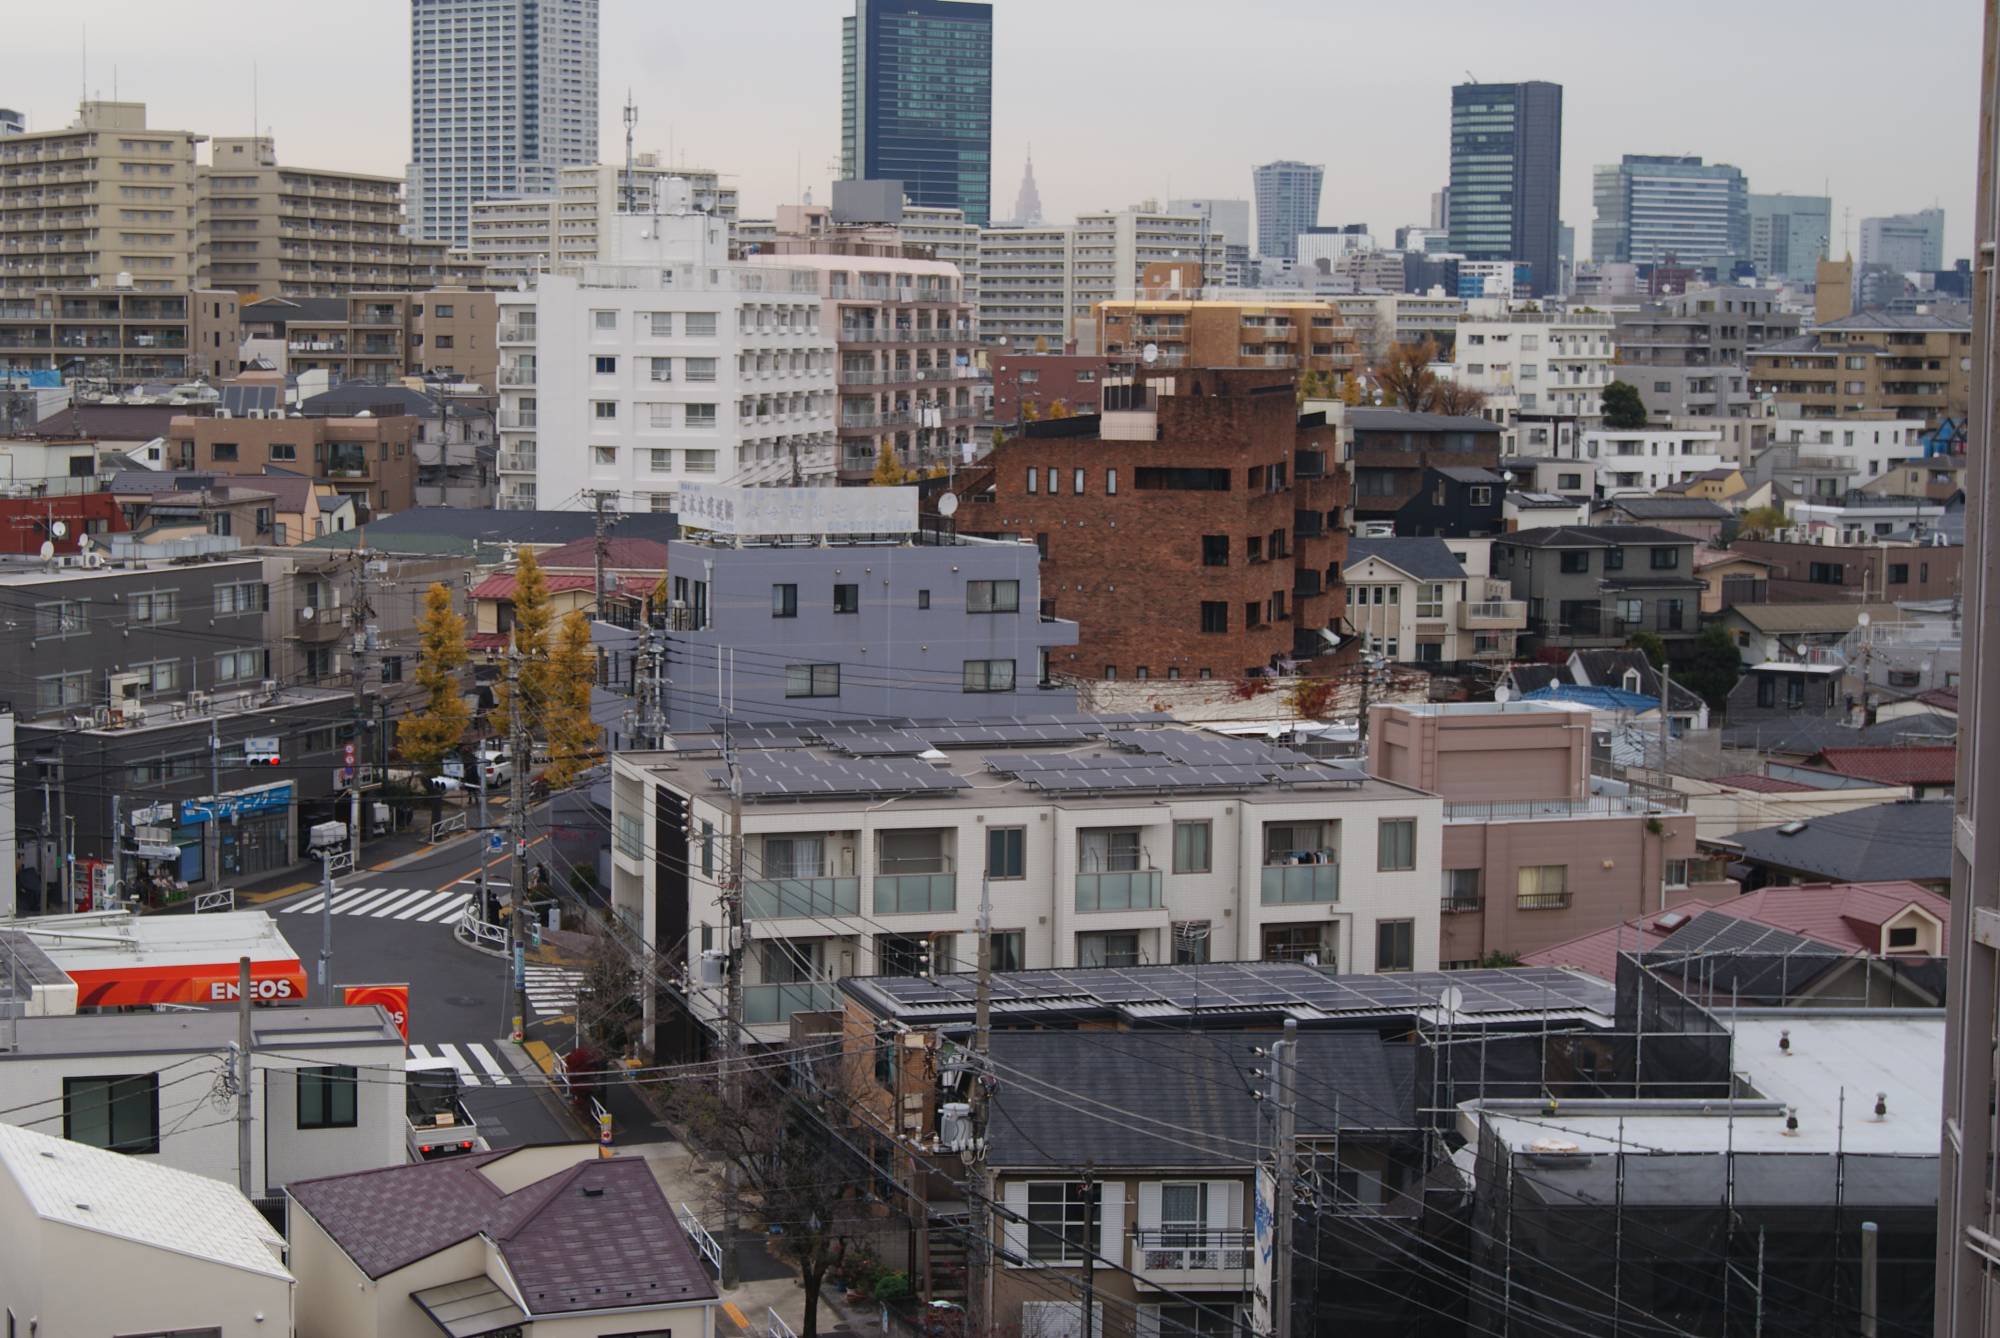 Solar panels on rooftops in Tokyo's Meguro Ward. Tokyo is planning to make the installation of rooftop solar panels on new homes and buildings compulsory from April 2025. | CHRIS RUSSELL